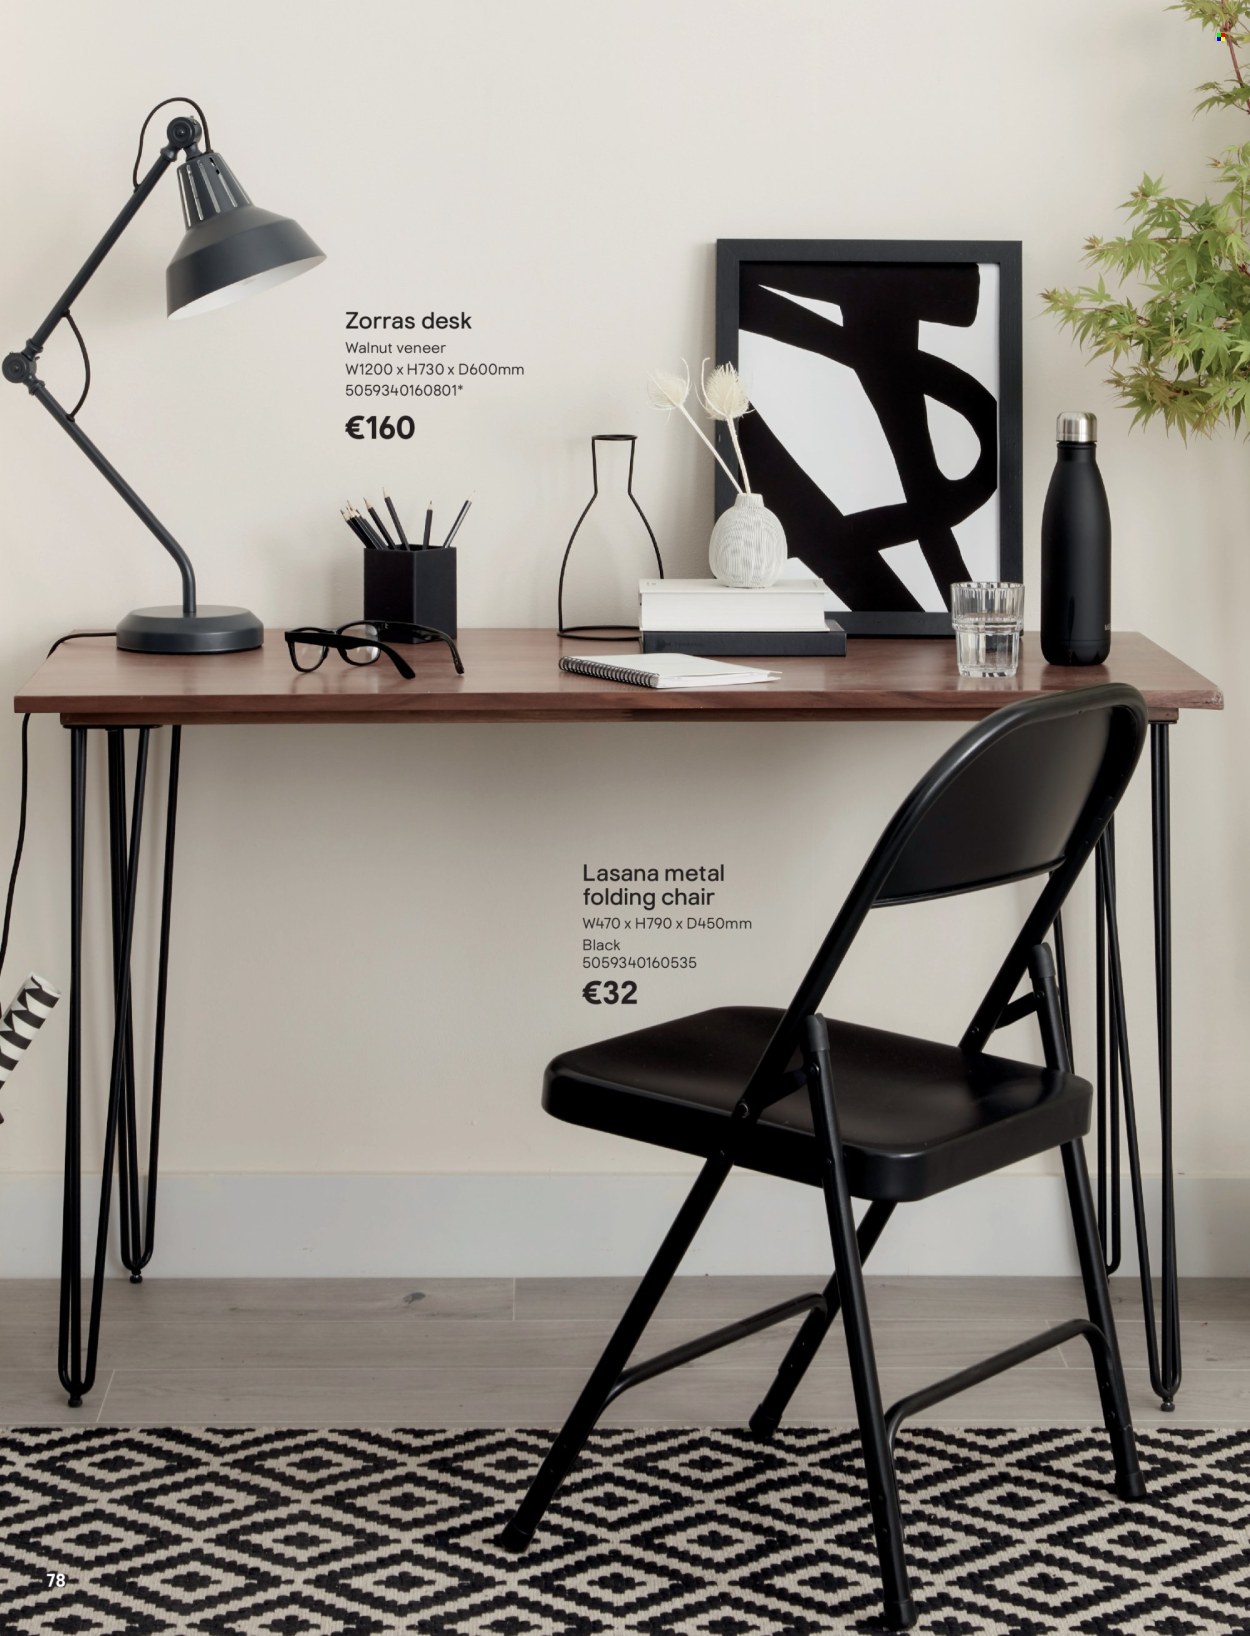 B&Q offer  - Sales products - chair, desk, folding chair. Page 78.